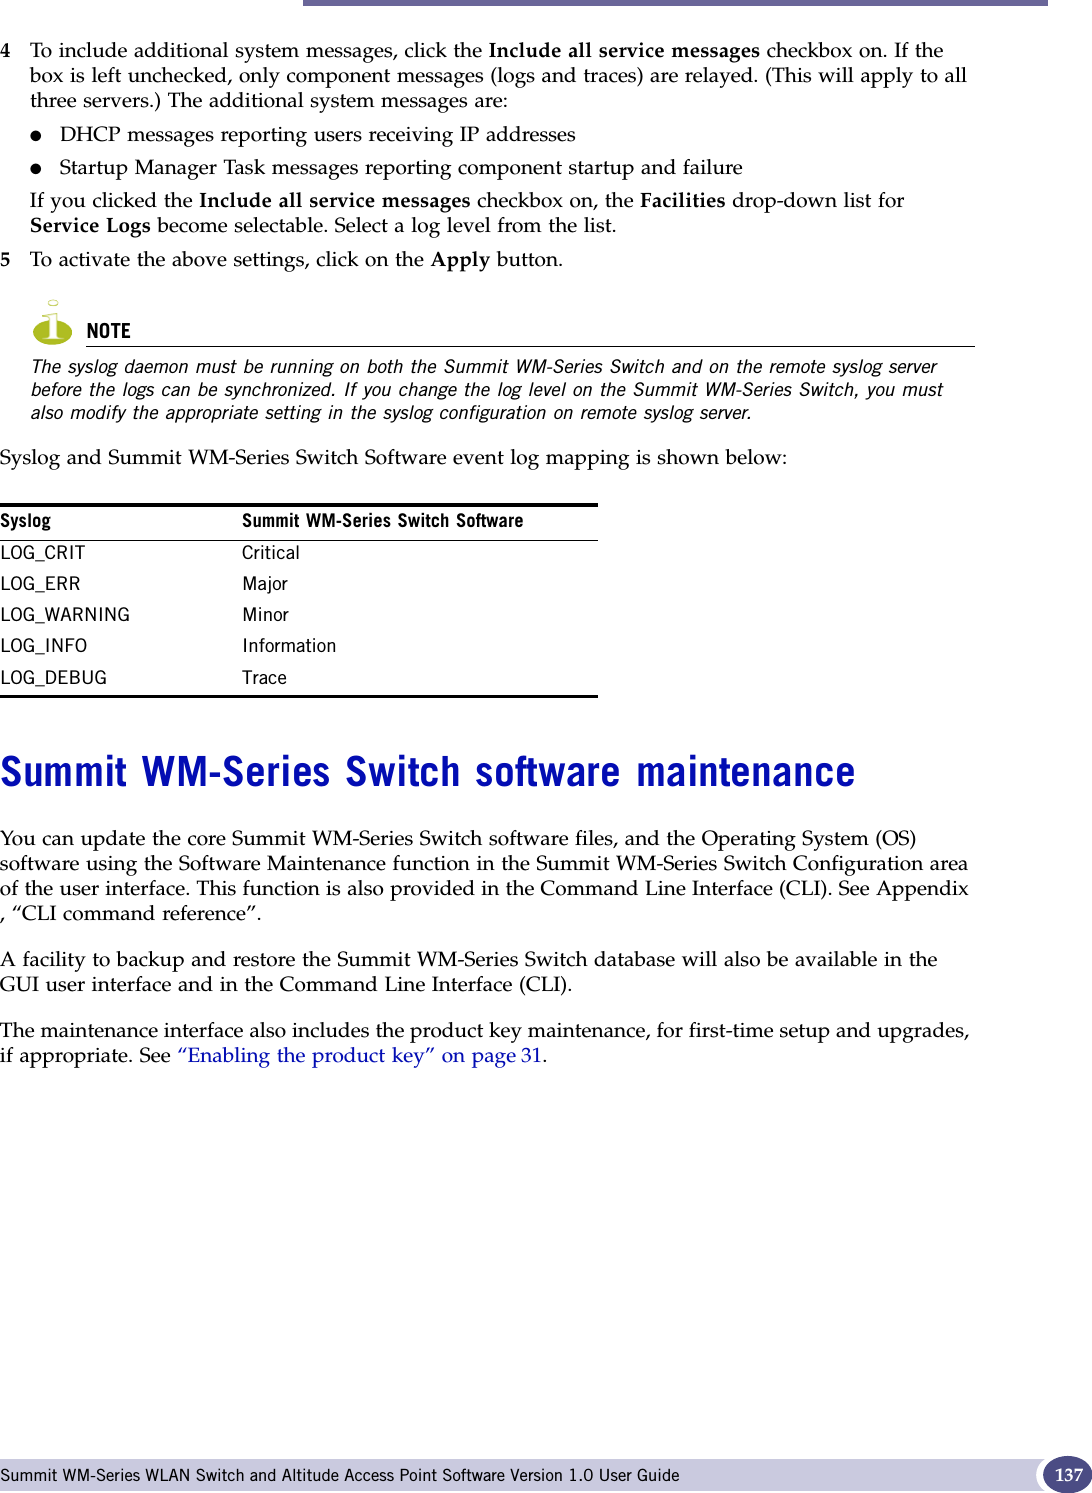 Summit WM-Series Switch software maintenance Summit WM-Series WLAN Switch and Altitude Access Point Software Version 1.0 User Guide 1374To include additional system messages, click the Include all service messages checkbox on. If the box is left unchecked, only component messages (logs and traces) are relayed. (This will apply to all three servers.) The additional system messages are:●DHCP messages reporting users receiving IP addresses●Startup Manager Task messages reporting component startup and failureIf you clicked the Include all service messages checkbox on, the Facilities drop-down list for Service Logs become selectable. Select a log level from the list.5To activate the above settings, click on the Apply button.NOTEThe syslog daemon must be running on both the Summit WM-Series Switch and on the remote syslog server before the logs can be synchronized. If you change the log level on the Summit WM-Series Switch, you must also modify the appropriate setting in the syslog configuration on remote syslog server.Syslog and Summit WM-Series Switch Software event log mapping is shown below:Summit WM-Series Switch software maintenanceYou can update the core Summit WM-Series Switch software files, and the Operating System (OS) software using the Software Maintenance function in the Summit WM-Series Switch Configuration area of the user interface. This function is also provided in the Command Line Interface (CLI). See Appendix , “CLI command reference”.A facility to backup and restore the Summit WM-Series Switch database will also be available in the GUI user interface and in the Command Line Interface (CLI).The maintenance interface also includes the product key maintenance, for first-time setup and upgrades, if appropriate. See “Enabling the product key” on page 31.Syslog Summit WM-Series Switch SoftwareLOG_CRIT CriticalLOG_ERR MajorLOG_WARNING MinorLOG_INFO InformationLOG_DEBUG Trace